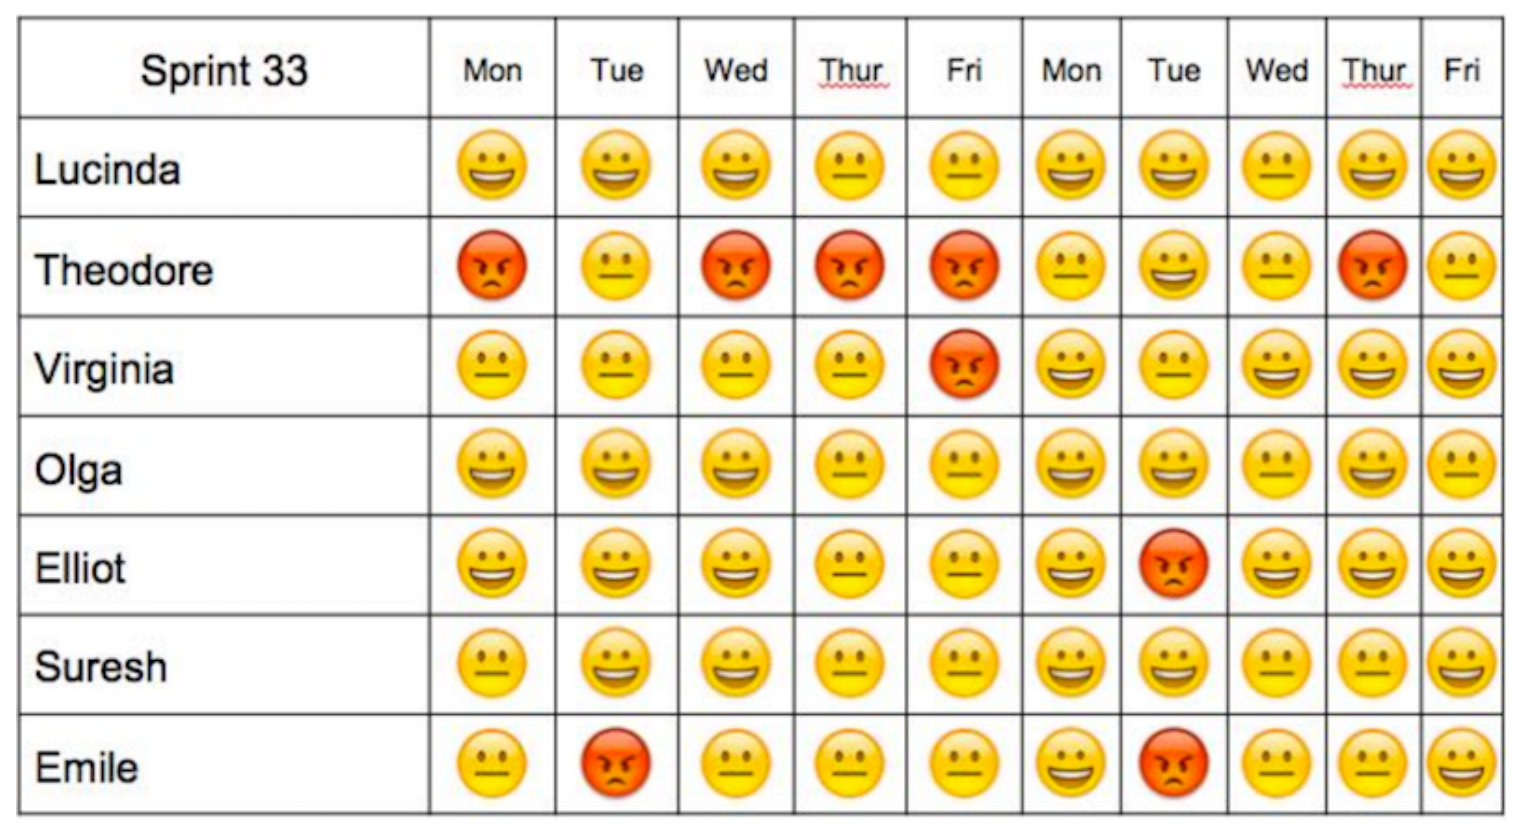 How Happy We Are at Work: The Niko Niko Calendar | by Philip Rogers |  innovative agile techniques and practices | Medium